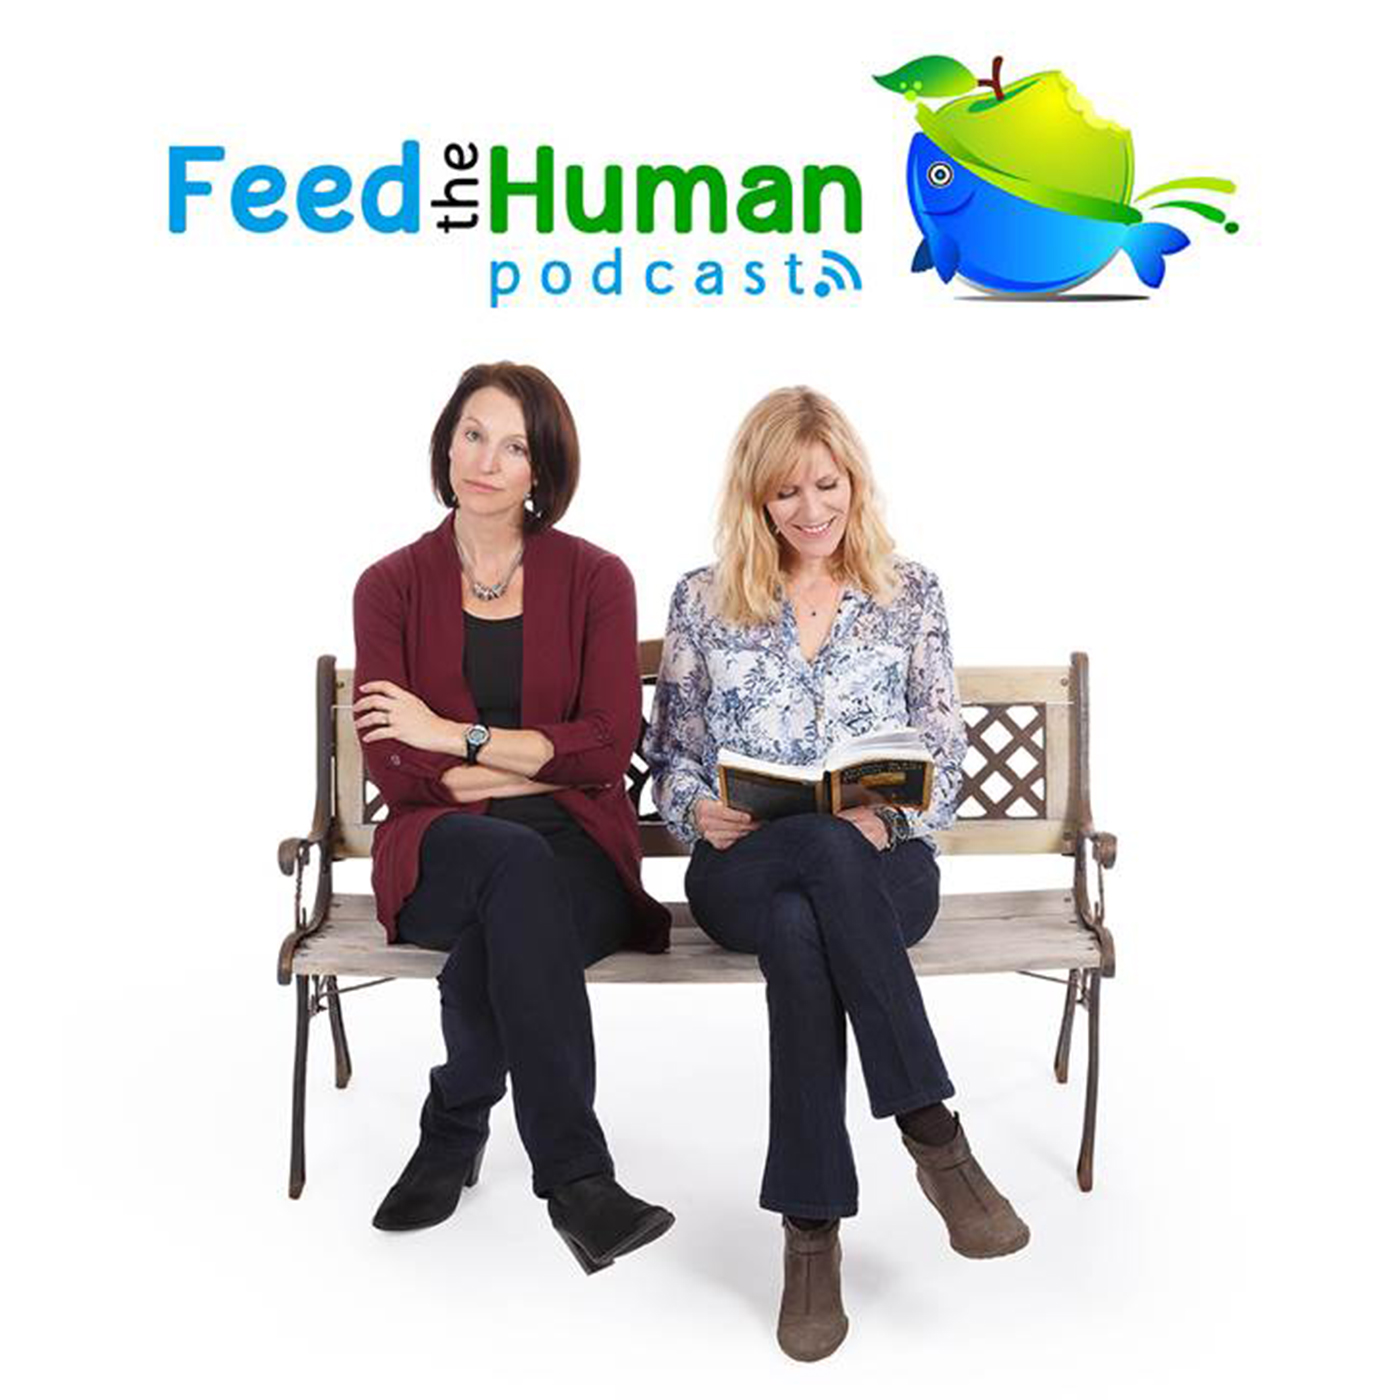 Cover Art for the Feed the Human Podcast on iTunes